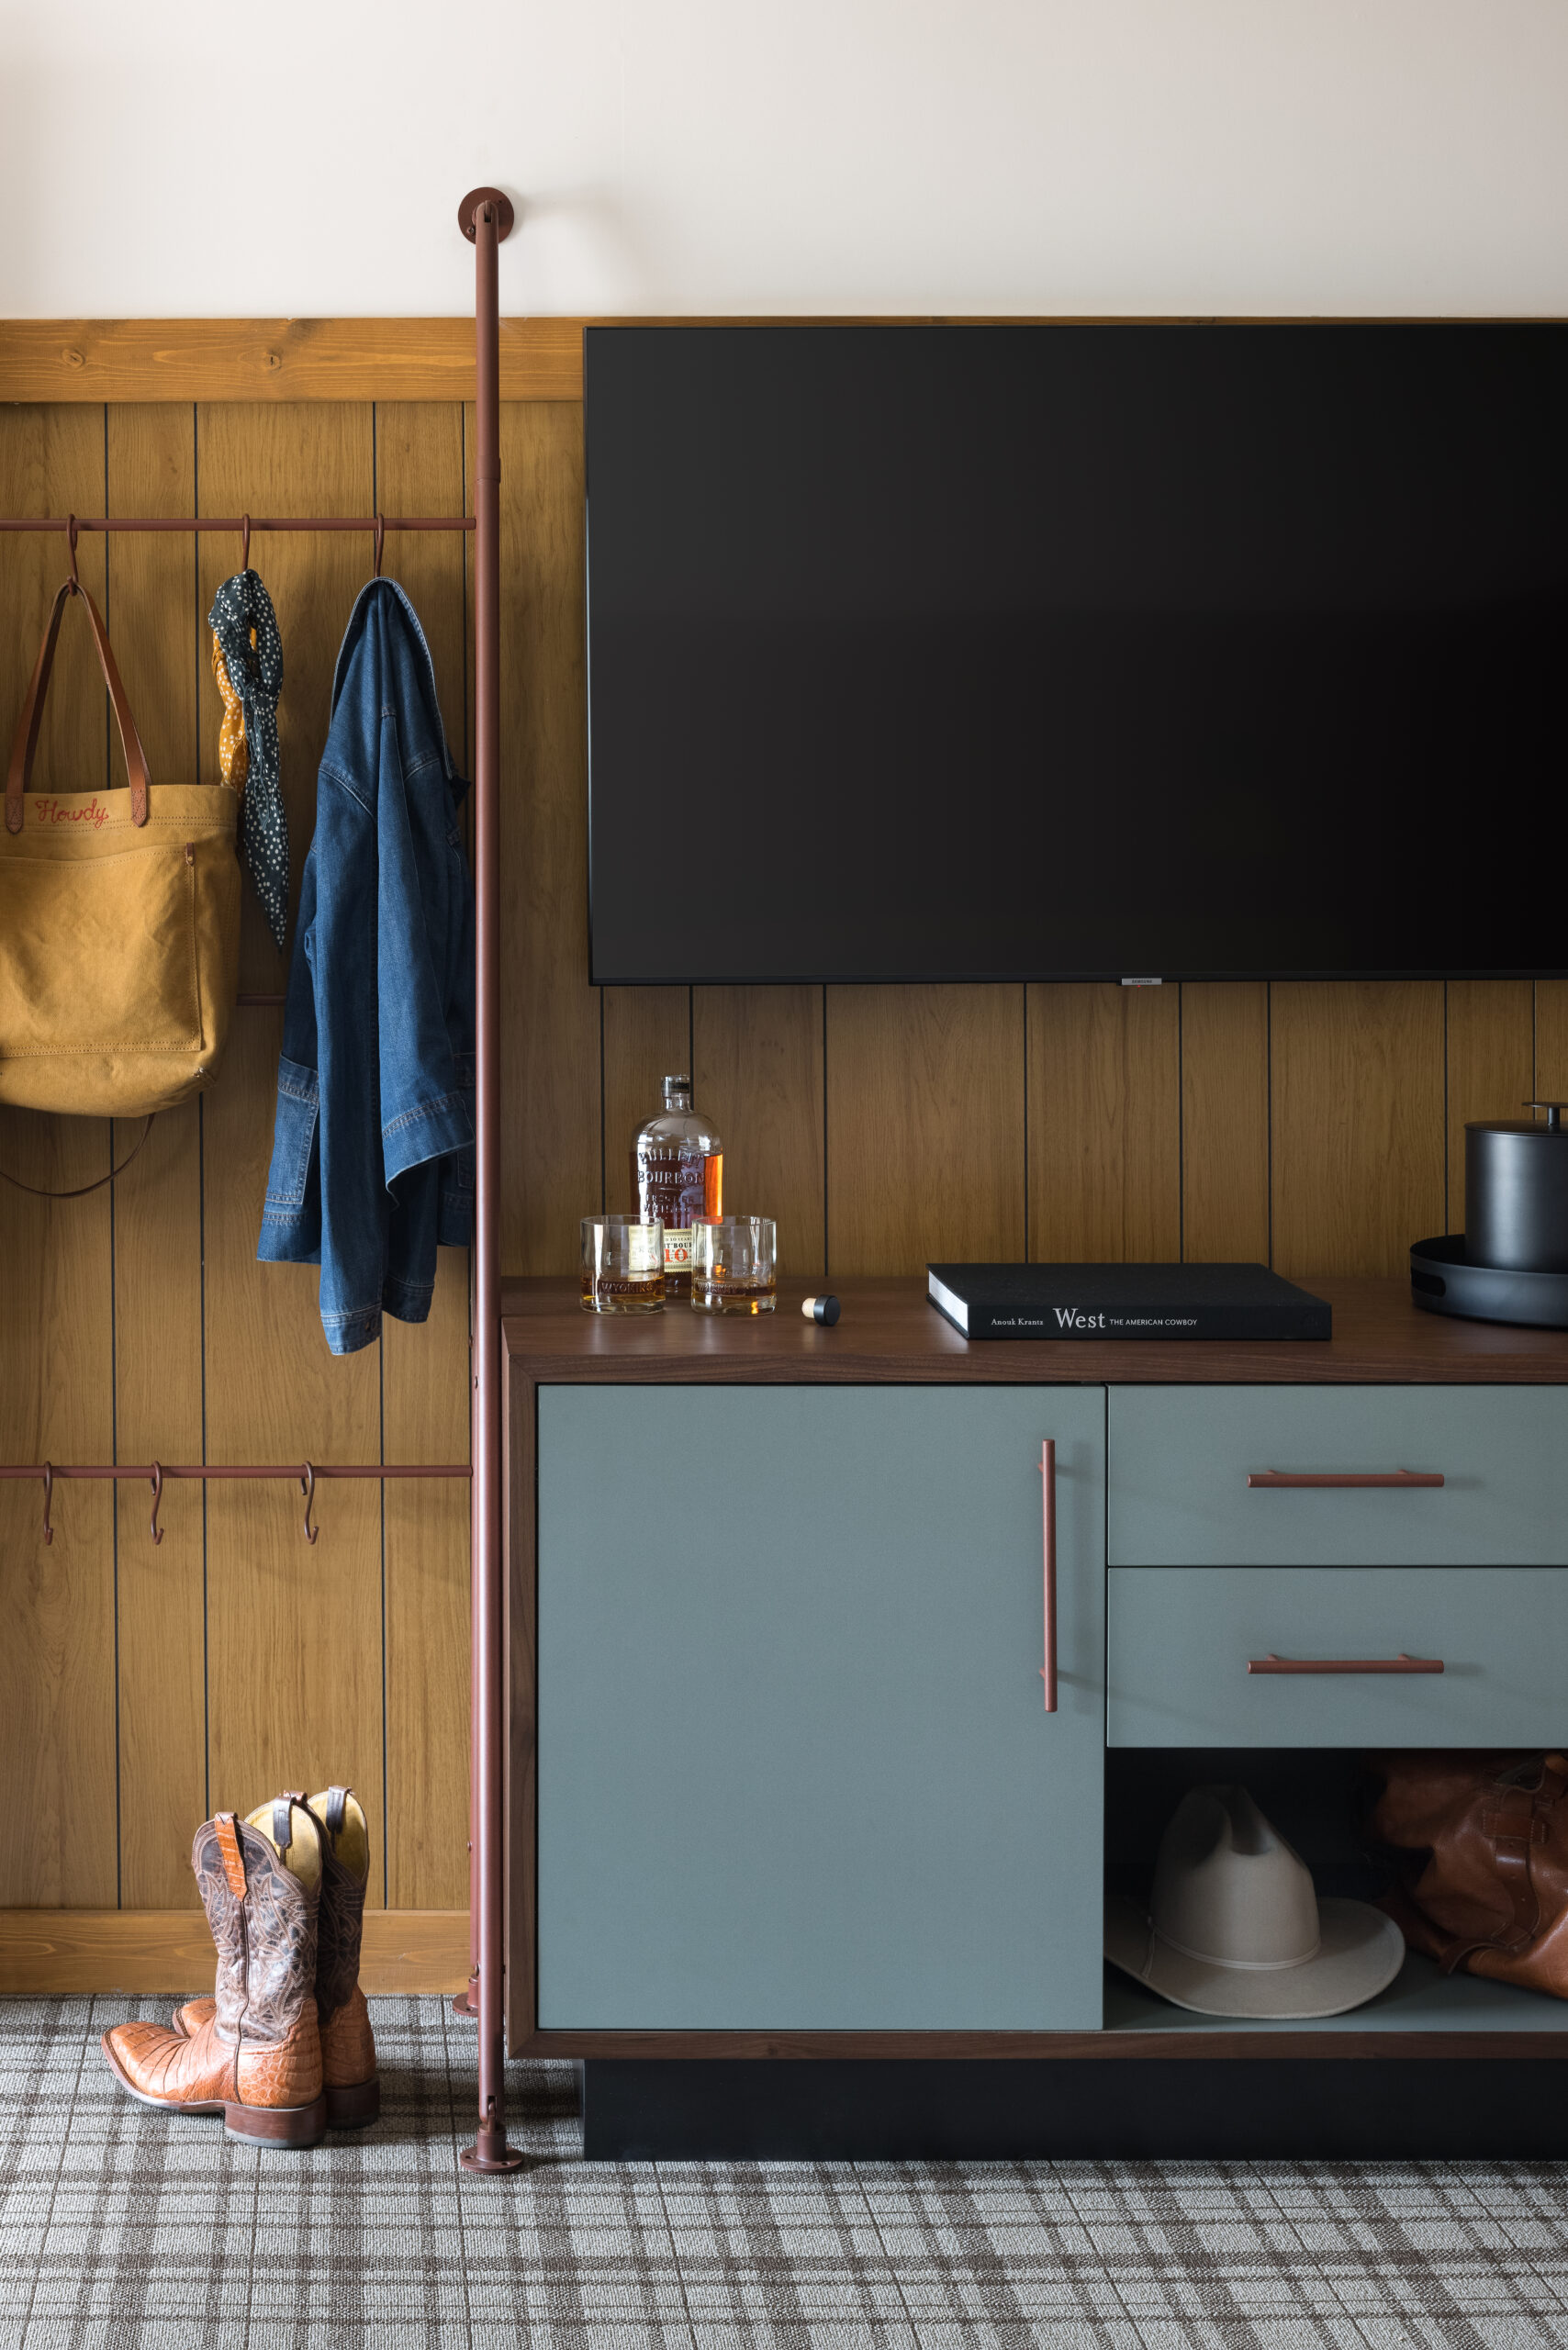 Wall-mounted TV, well-organized cabinet, and neatly hung clothes and handbags create an orderly arrangement.